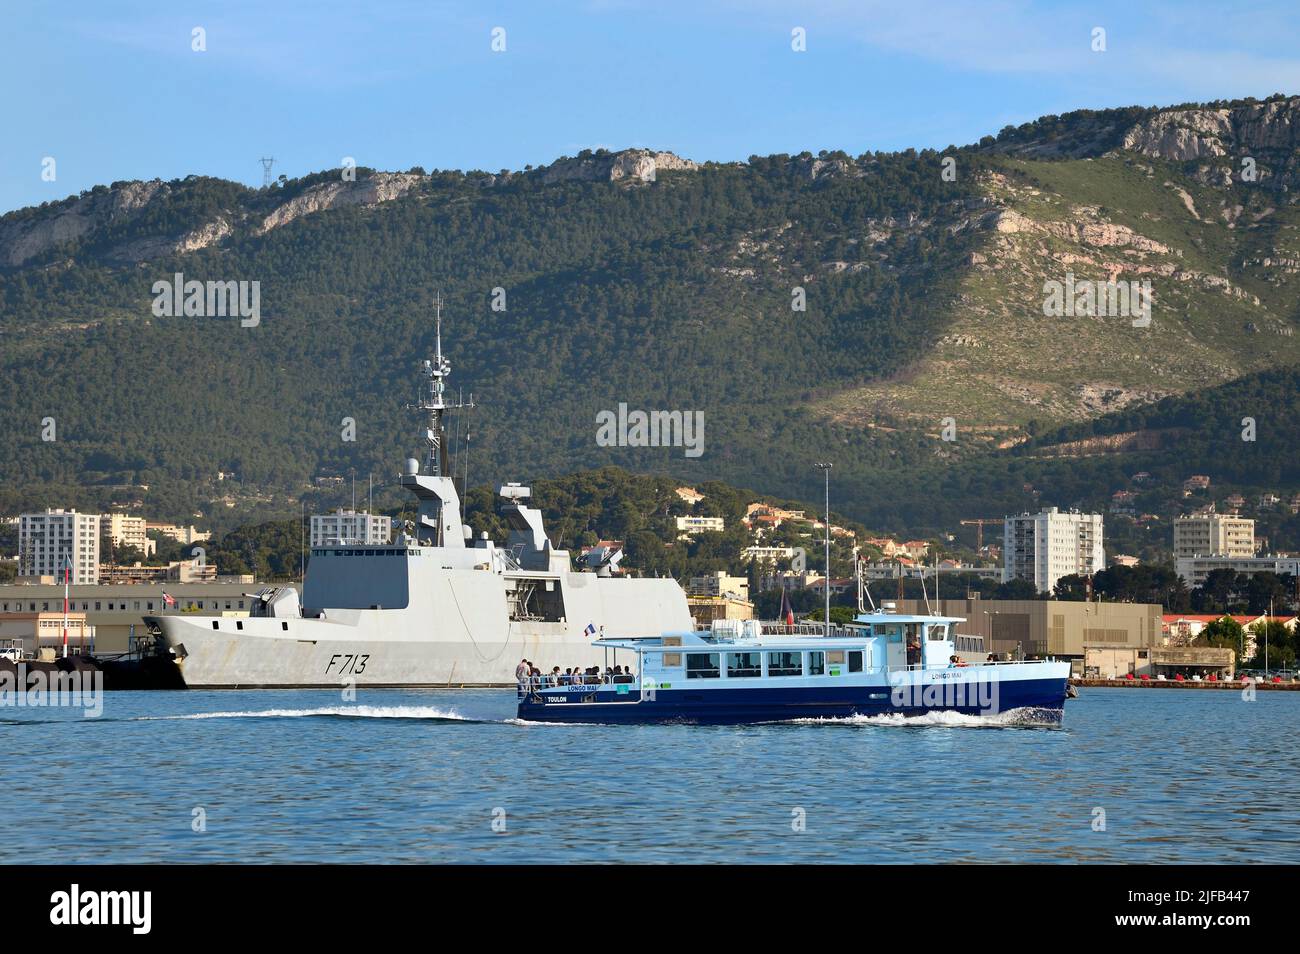 France, Var, Toulon, water bus passing in front of the naval base (Arsenal), Mount Faron in the background Stock Photo